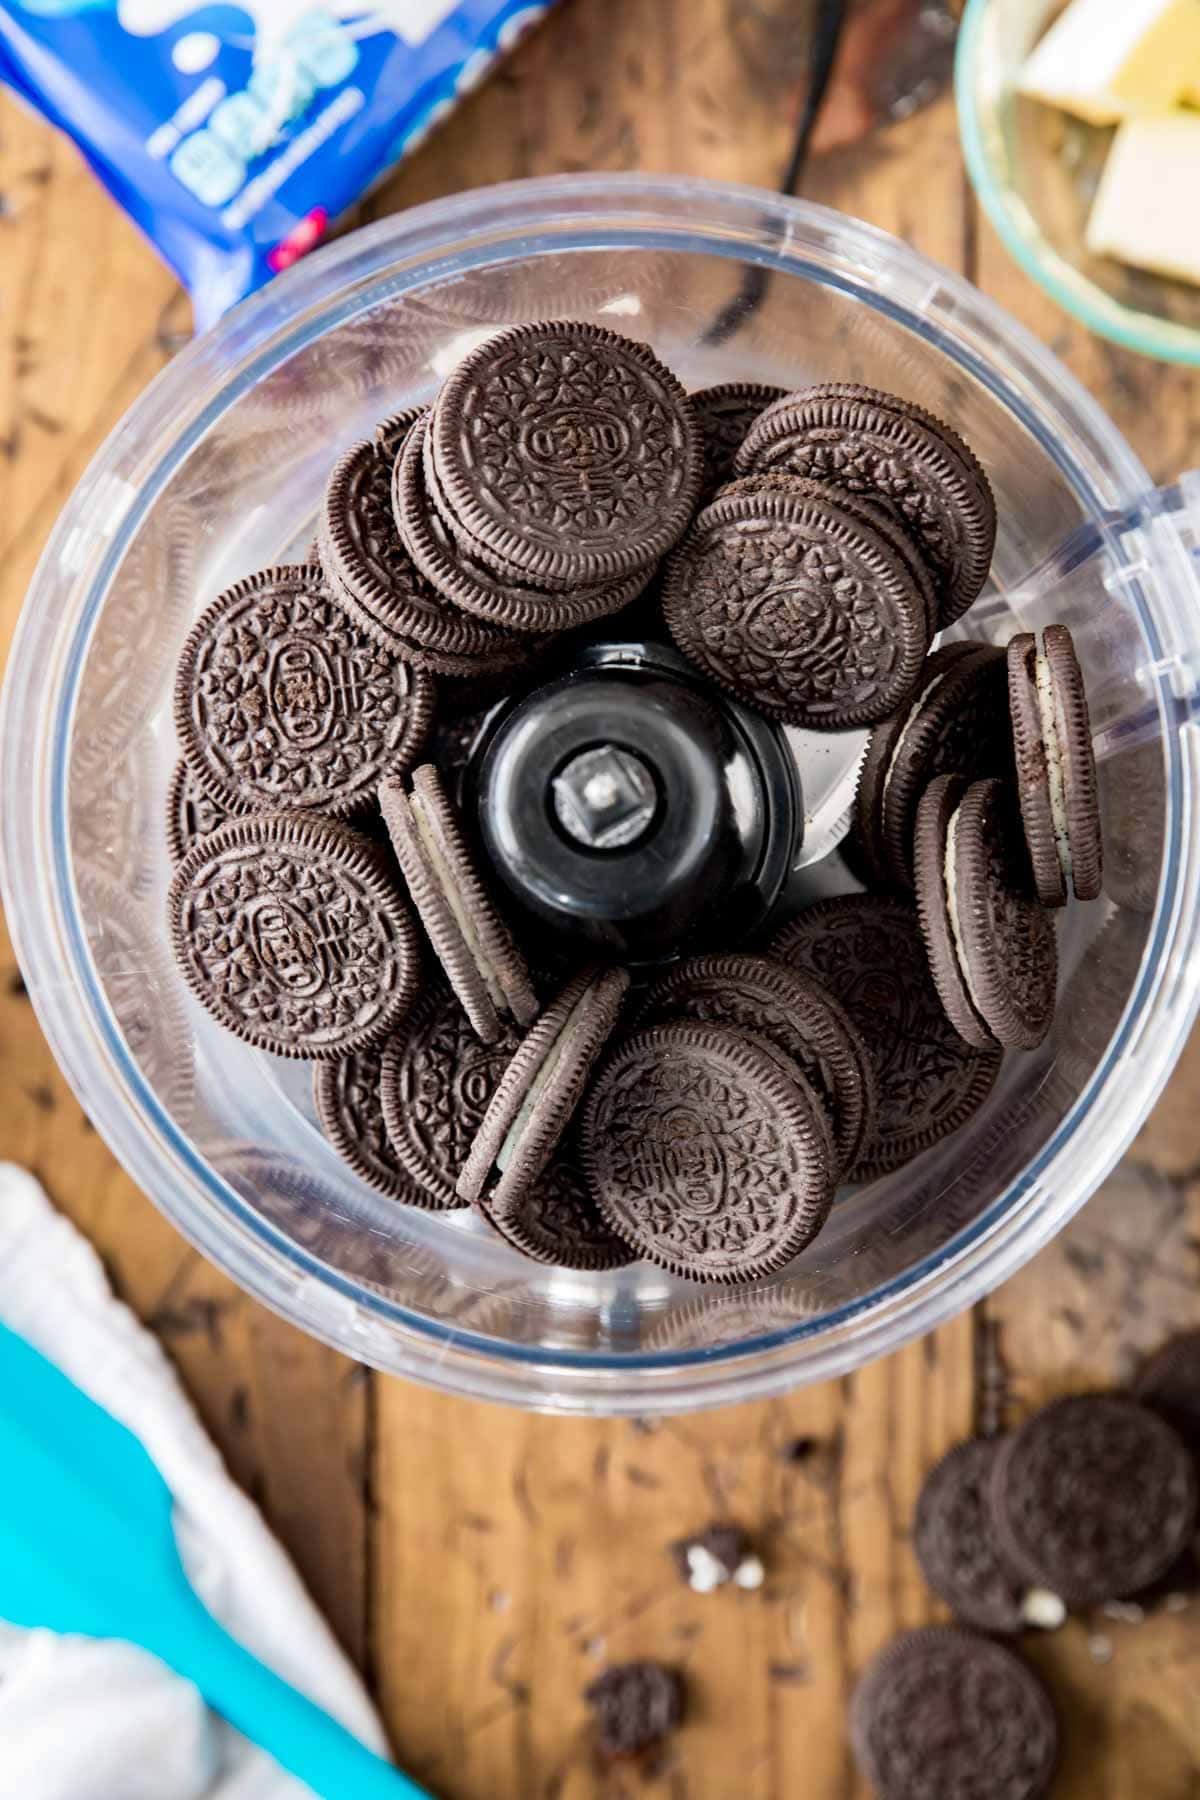 Oreo sandwich cookies in a food processor bowl.